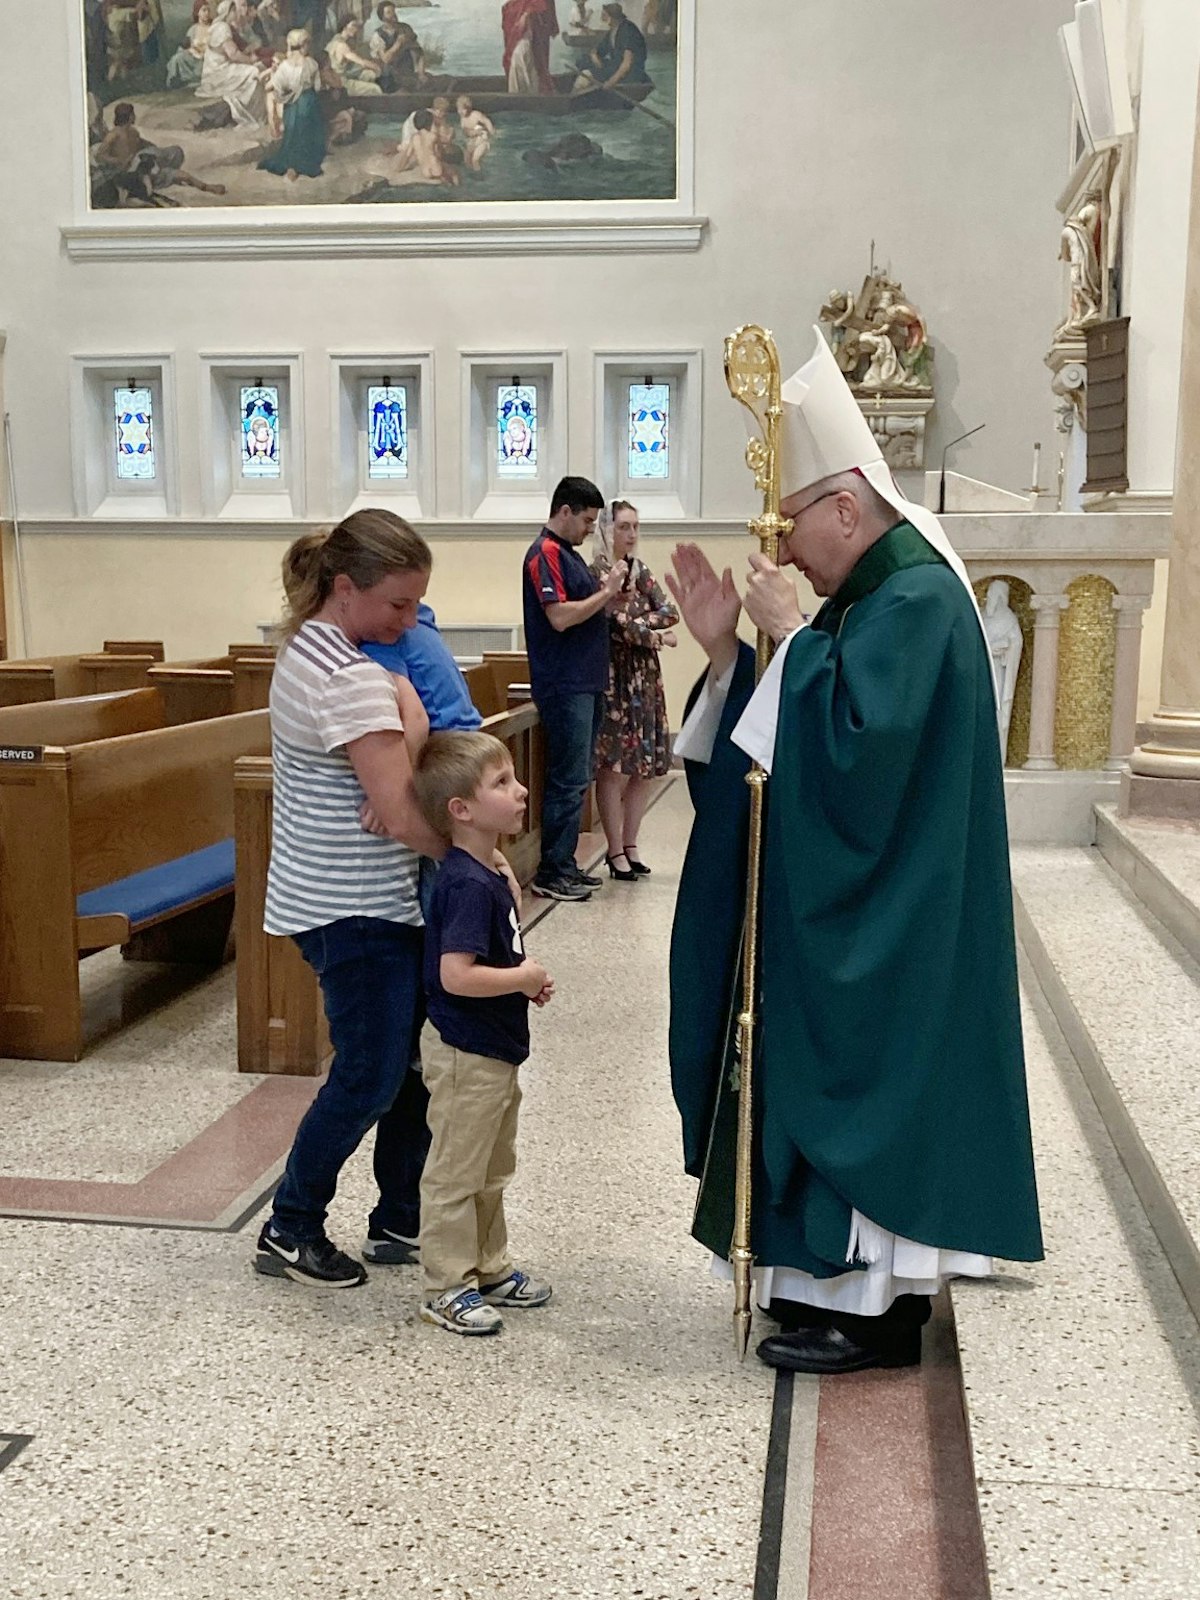 Bishop Monforton blesses a young family during a parish visit in the Diocese of Steubenville. Detroit's new auxiliary bishop said he believes strongly in the value of person-to-person engagement, making a point to visit as many parishes and schools as possible.